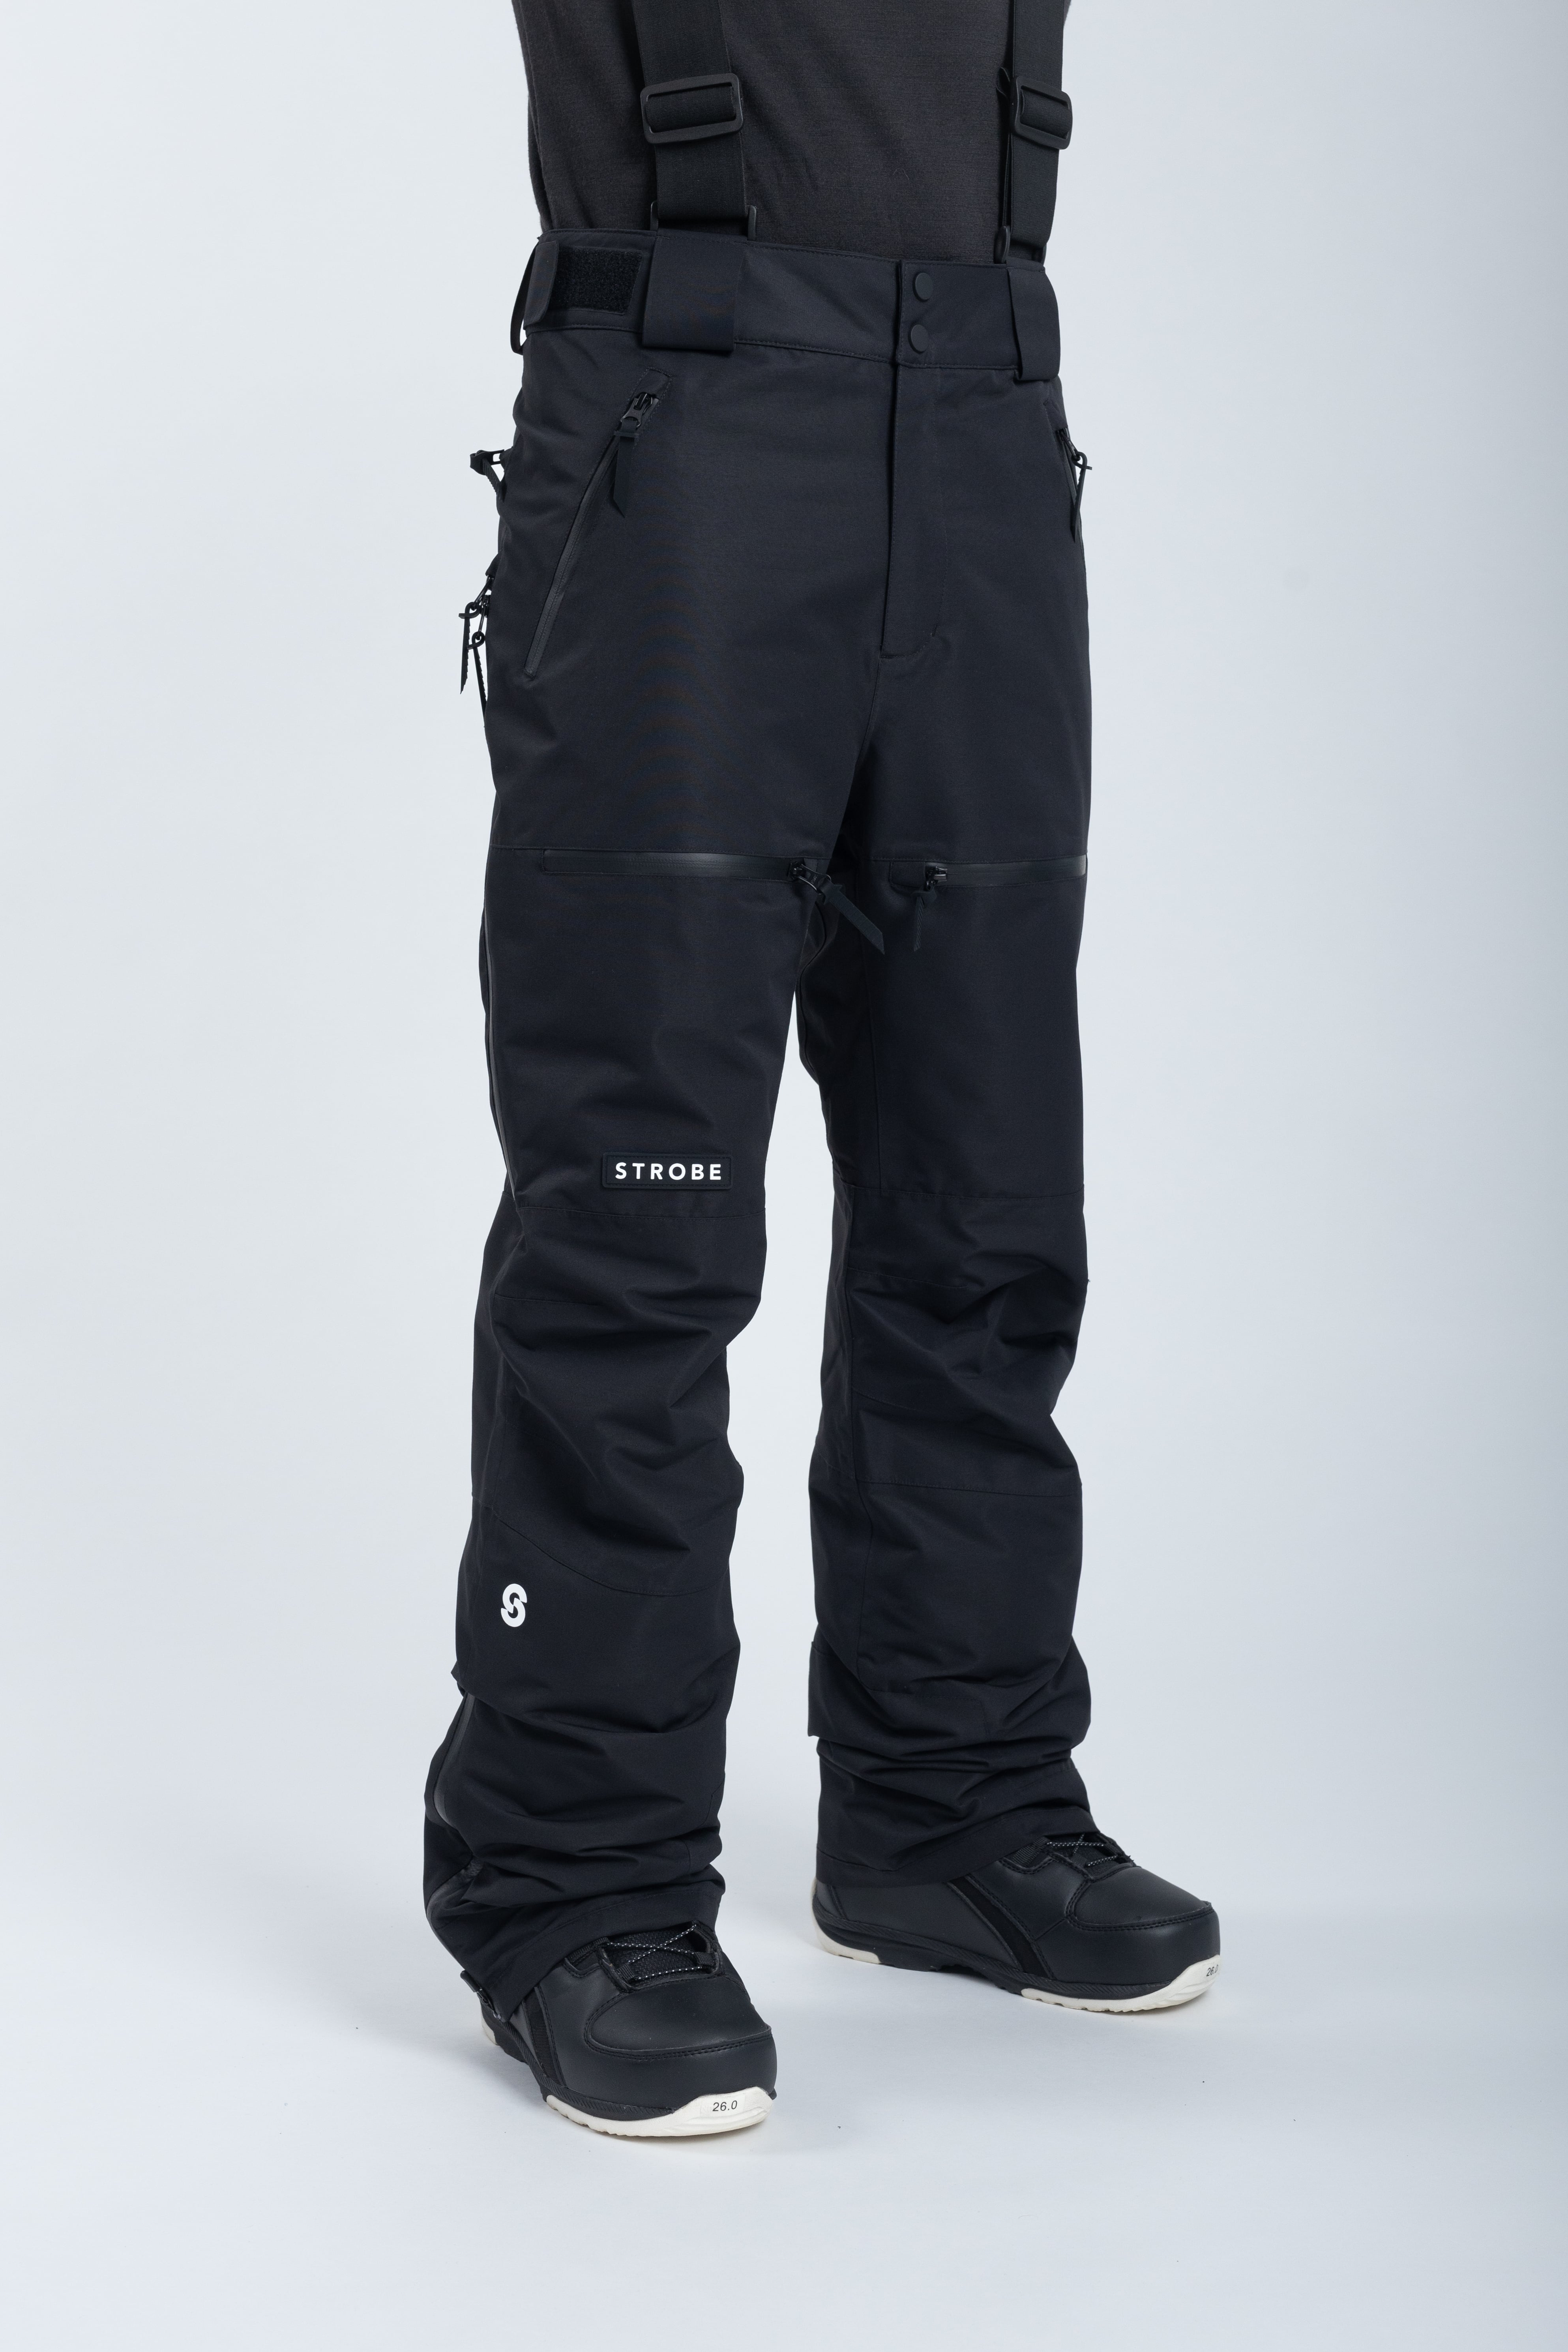 The North Face Freedom Snow Pants  Mens Tall Sizes  REI Coop